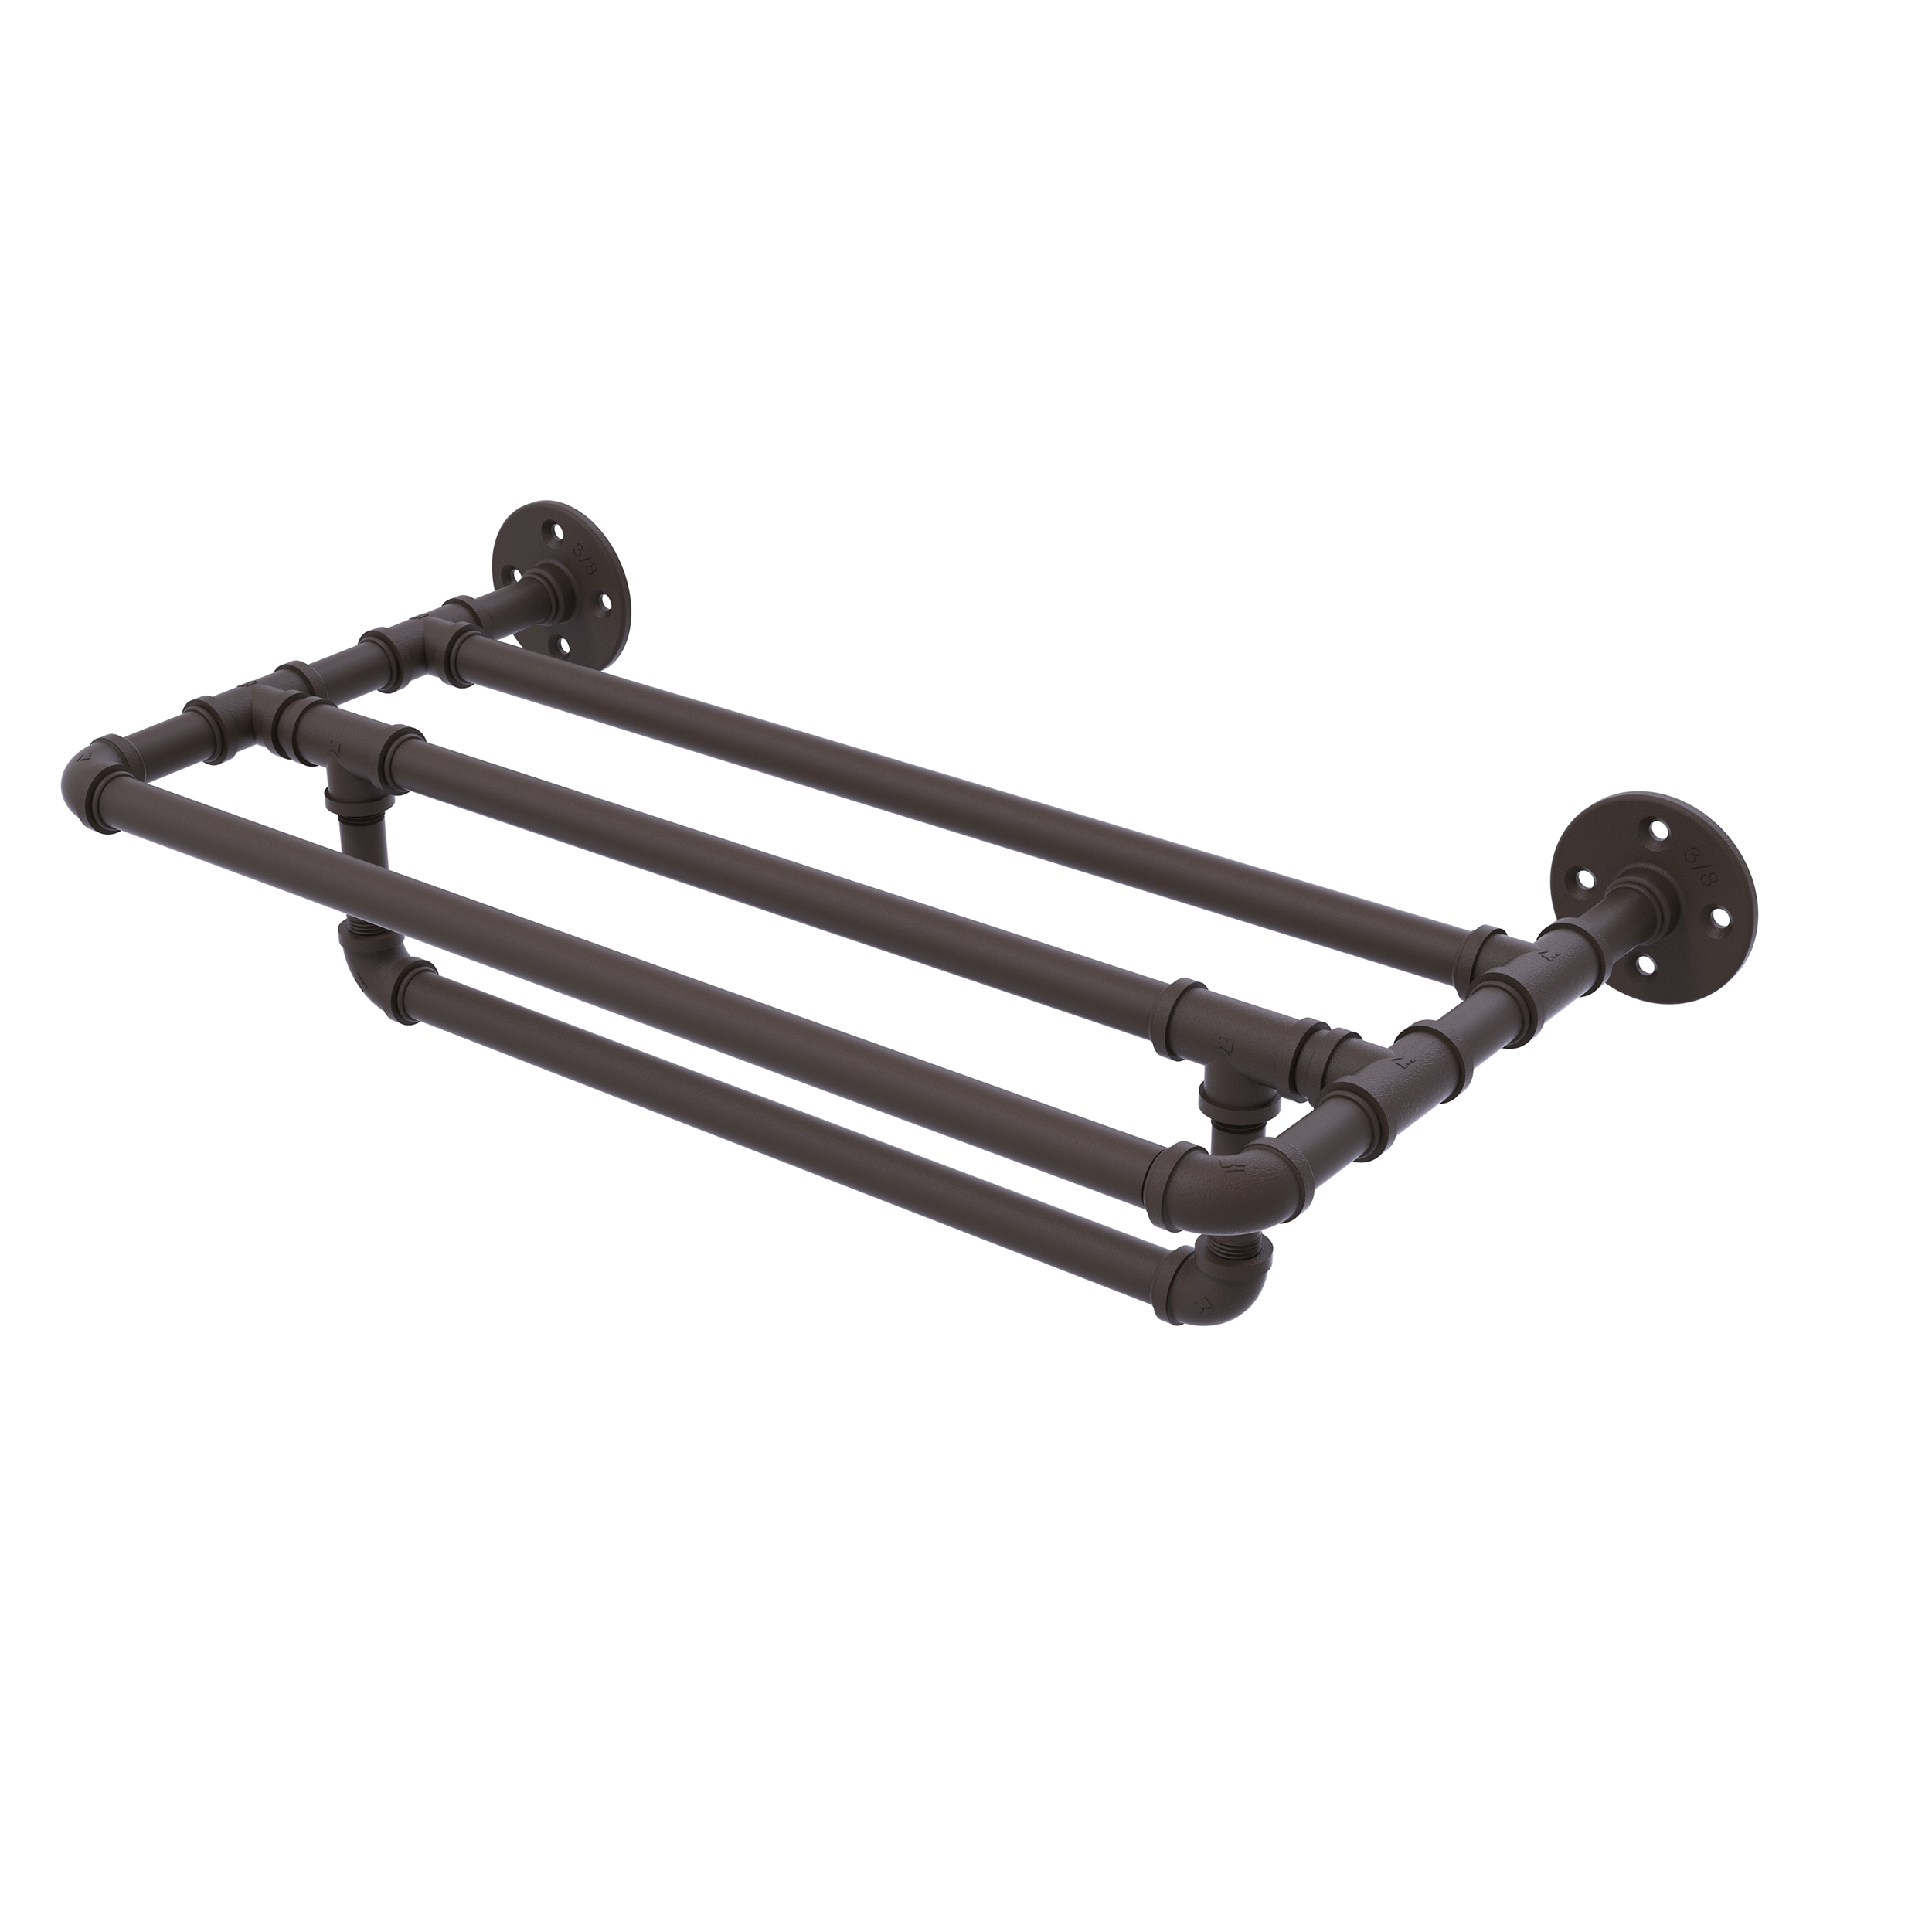 24" Wall Mounted Towel Shelf With Towel Bar, Oil Rubbed Bronze Finish